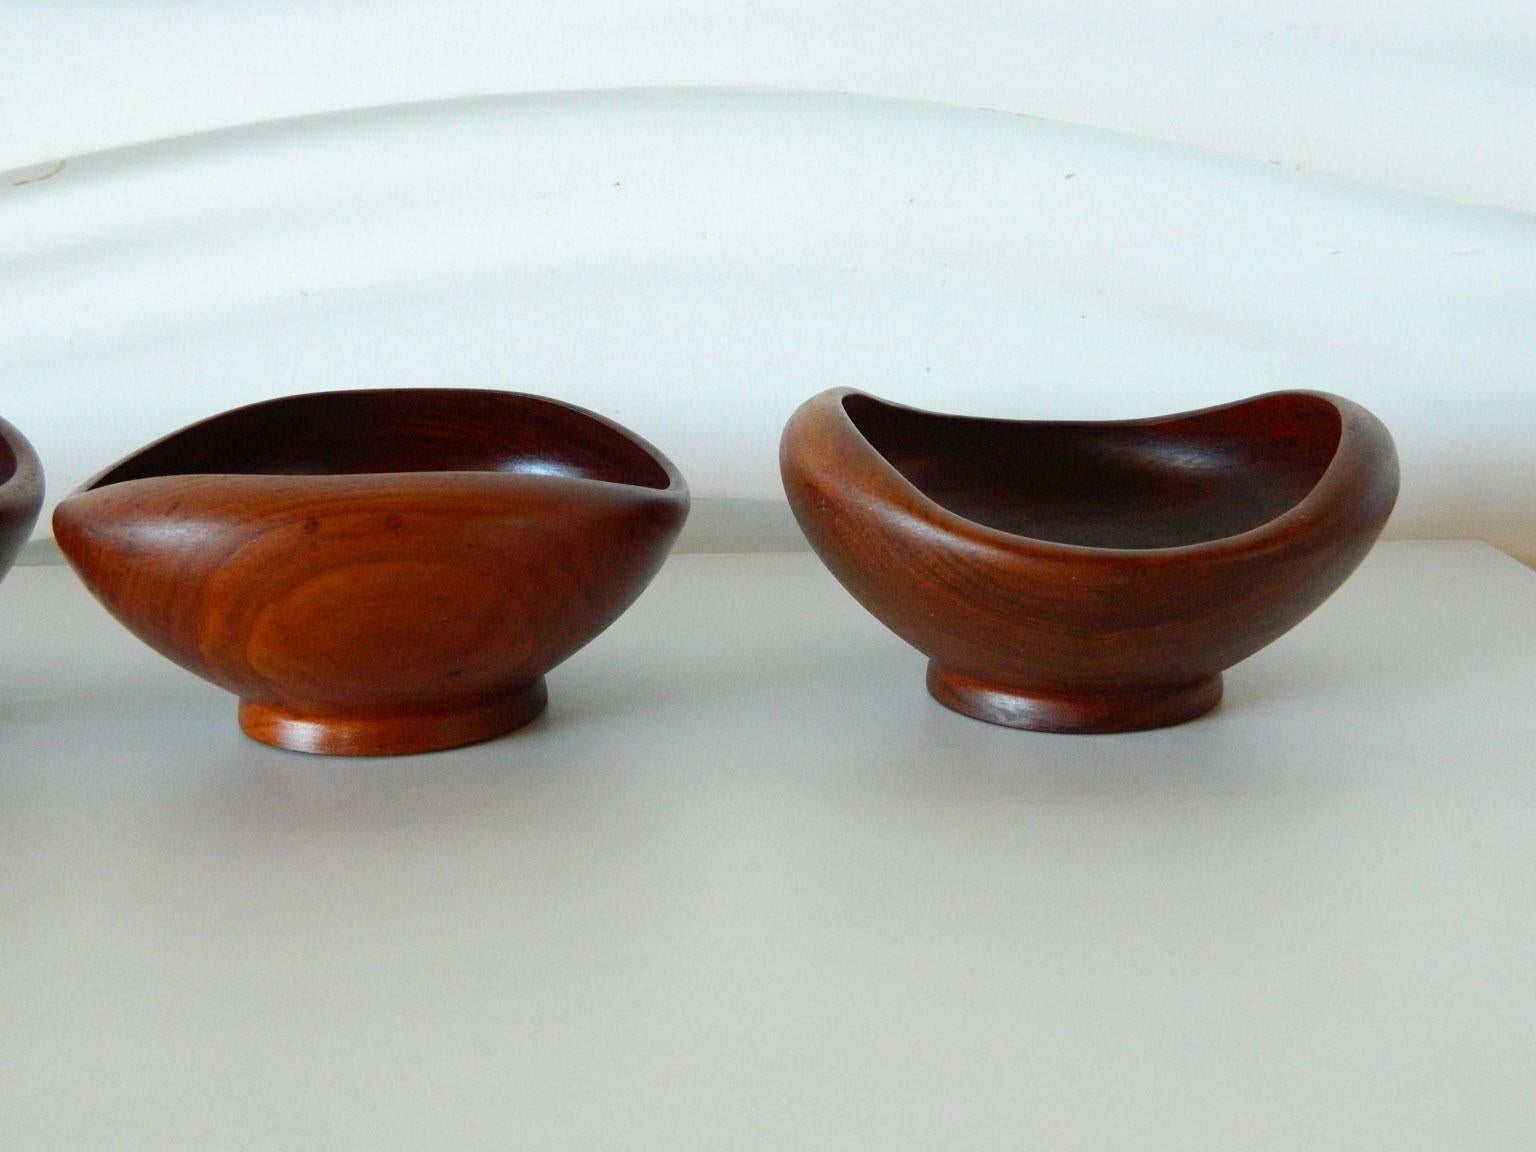 This set of four turned, teak wood bowls have curved edges and footed bases. Reminiscent of Finn Juhl's work for Kay Bojesen.